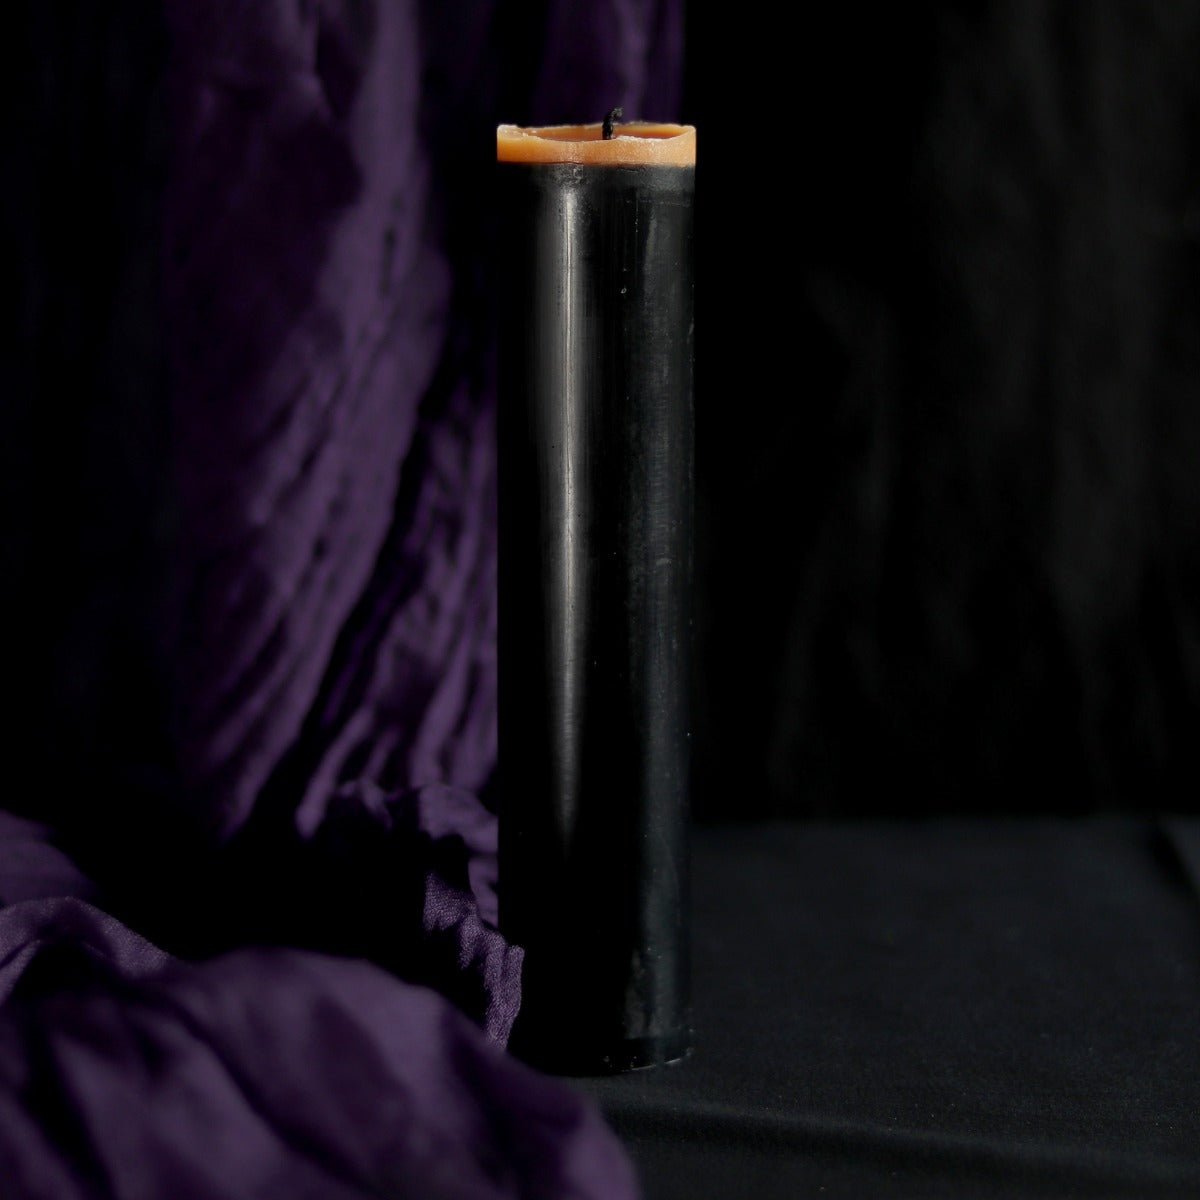 Samhain Spell Candle - 13 Moons